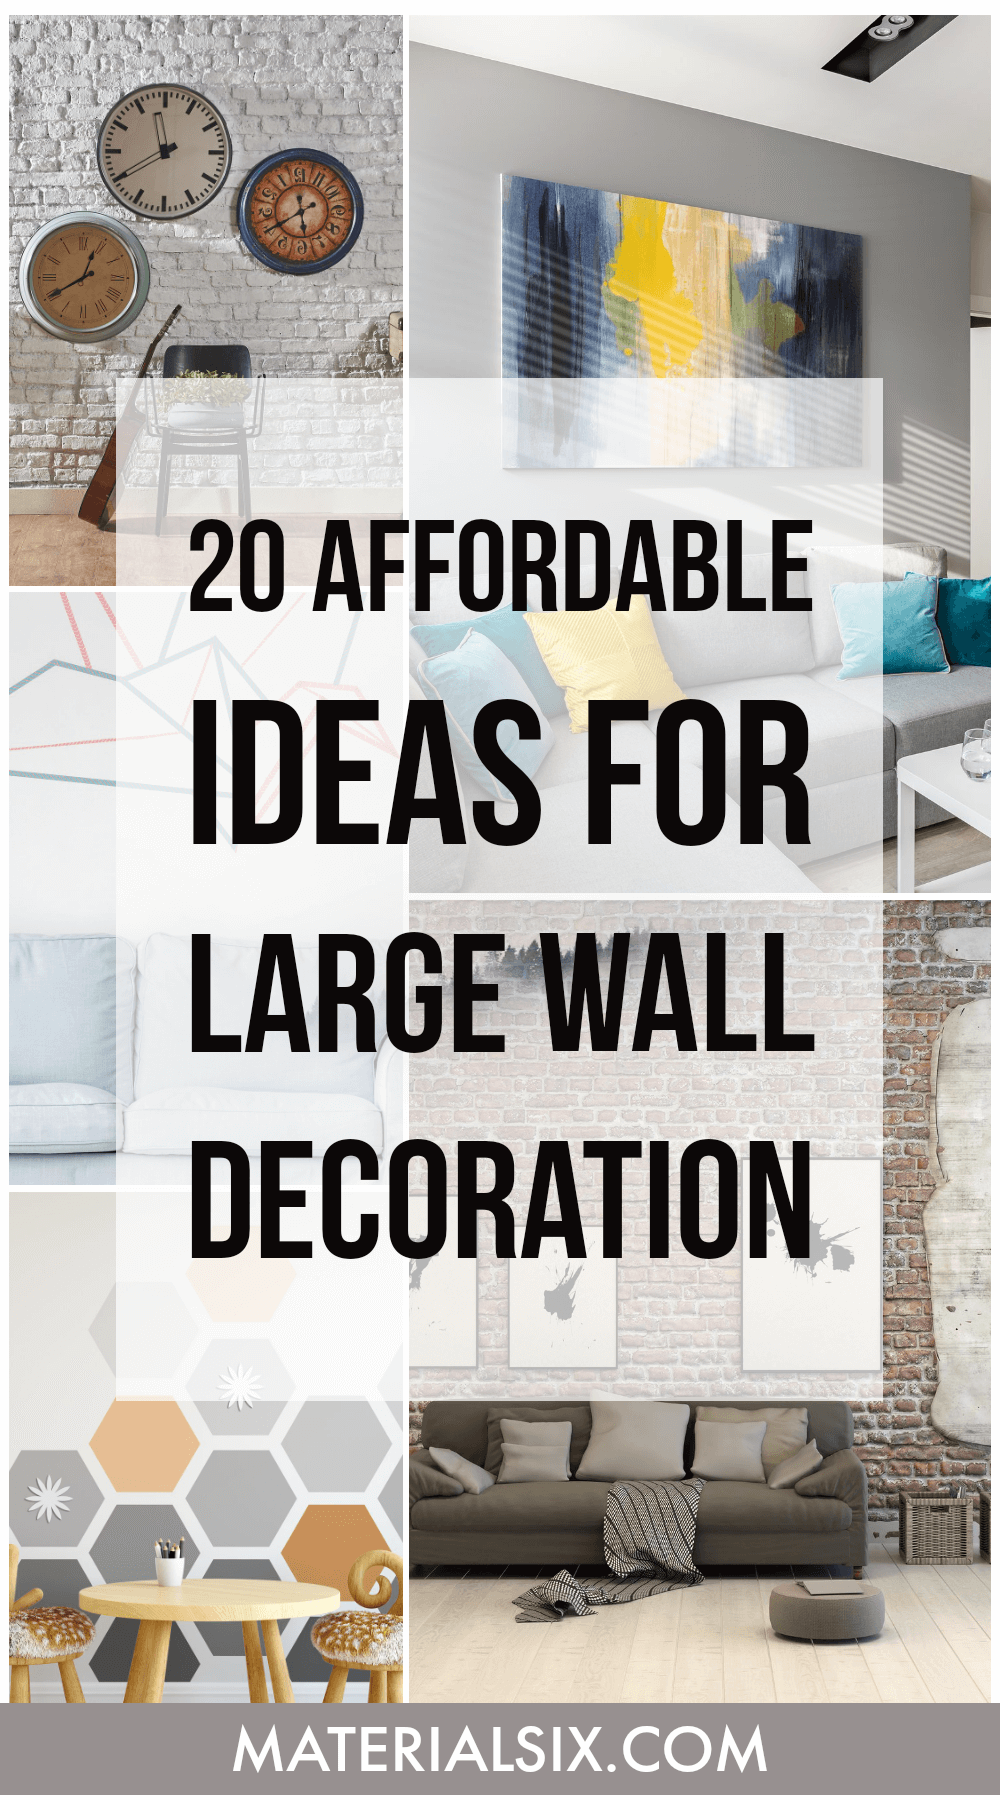 20 Affordable ideas for large wall decoration